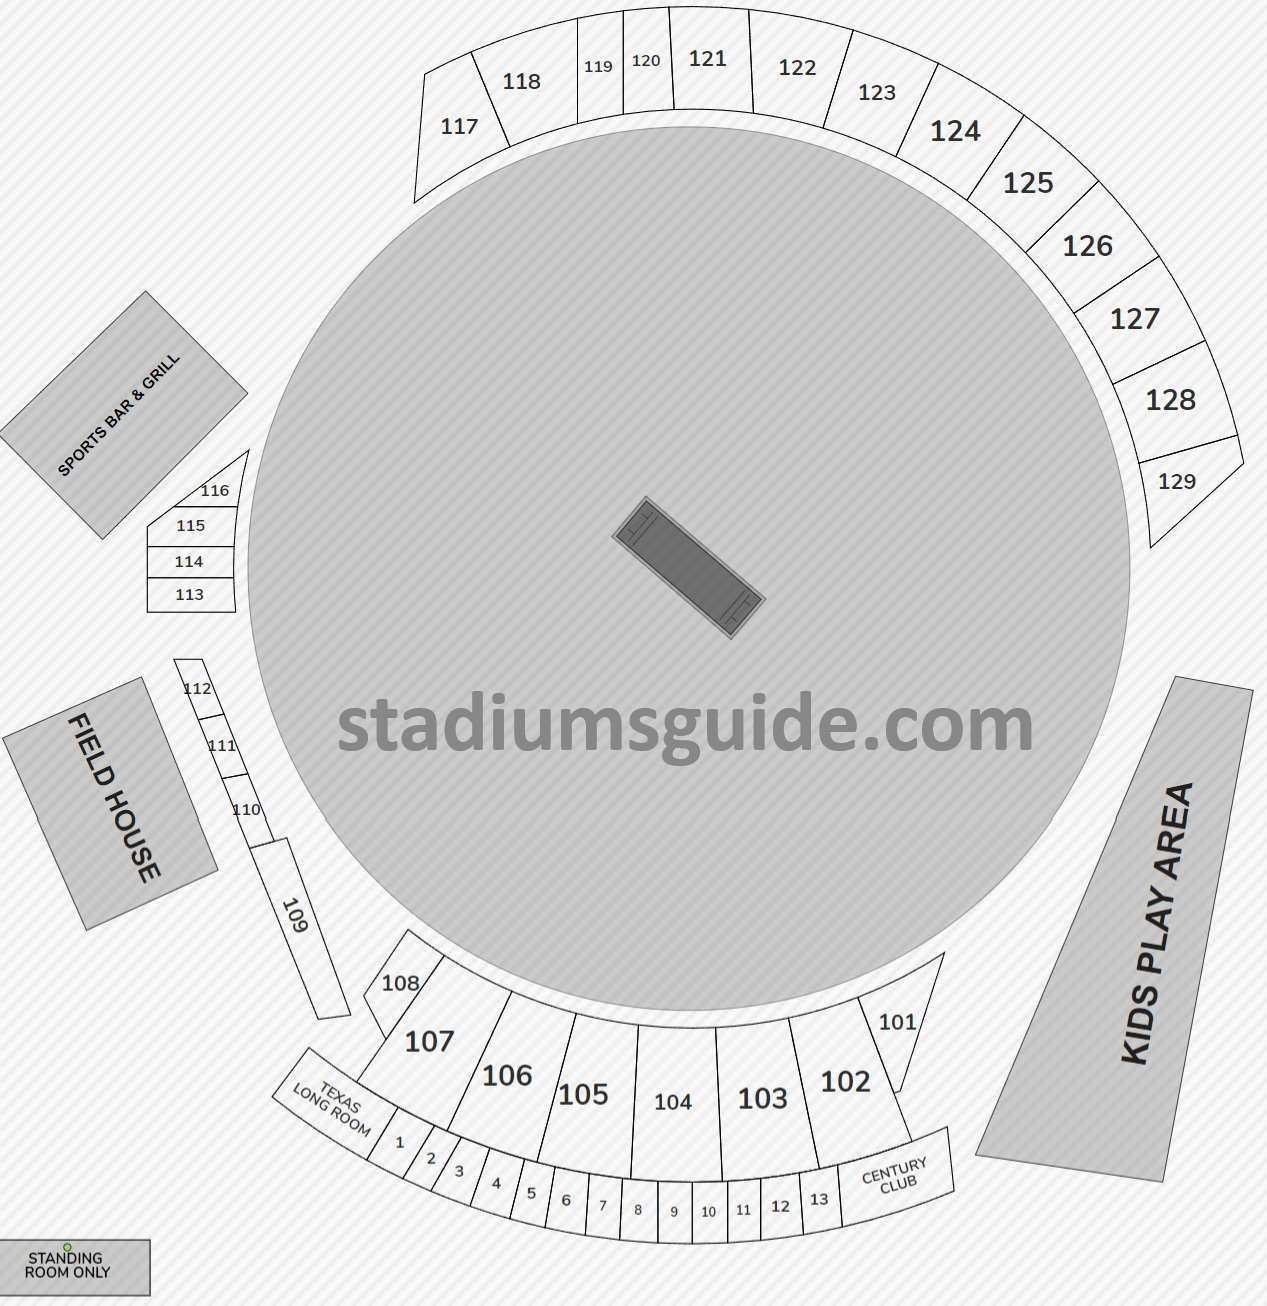 Texas Grand Prairie Stadium Seating Chart with Seat Rows and Seat Numbers